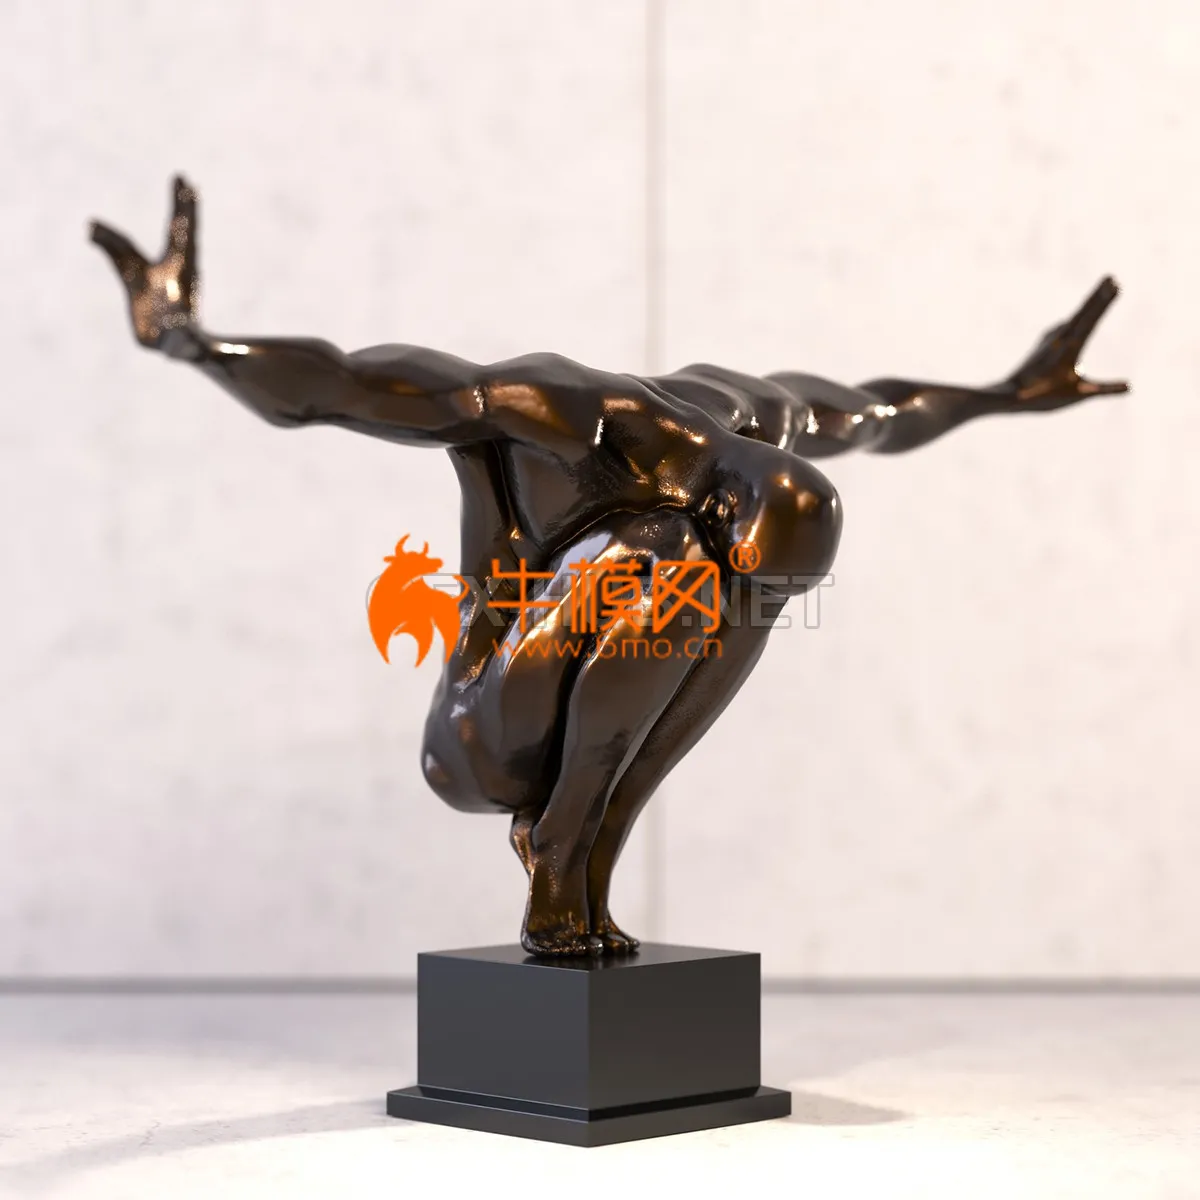 Olympic man Sculpture By Libra Company – 2418